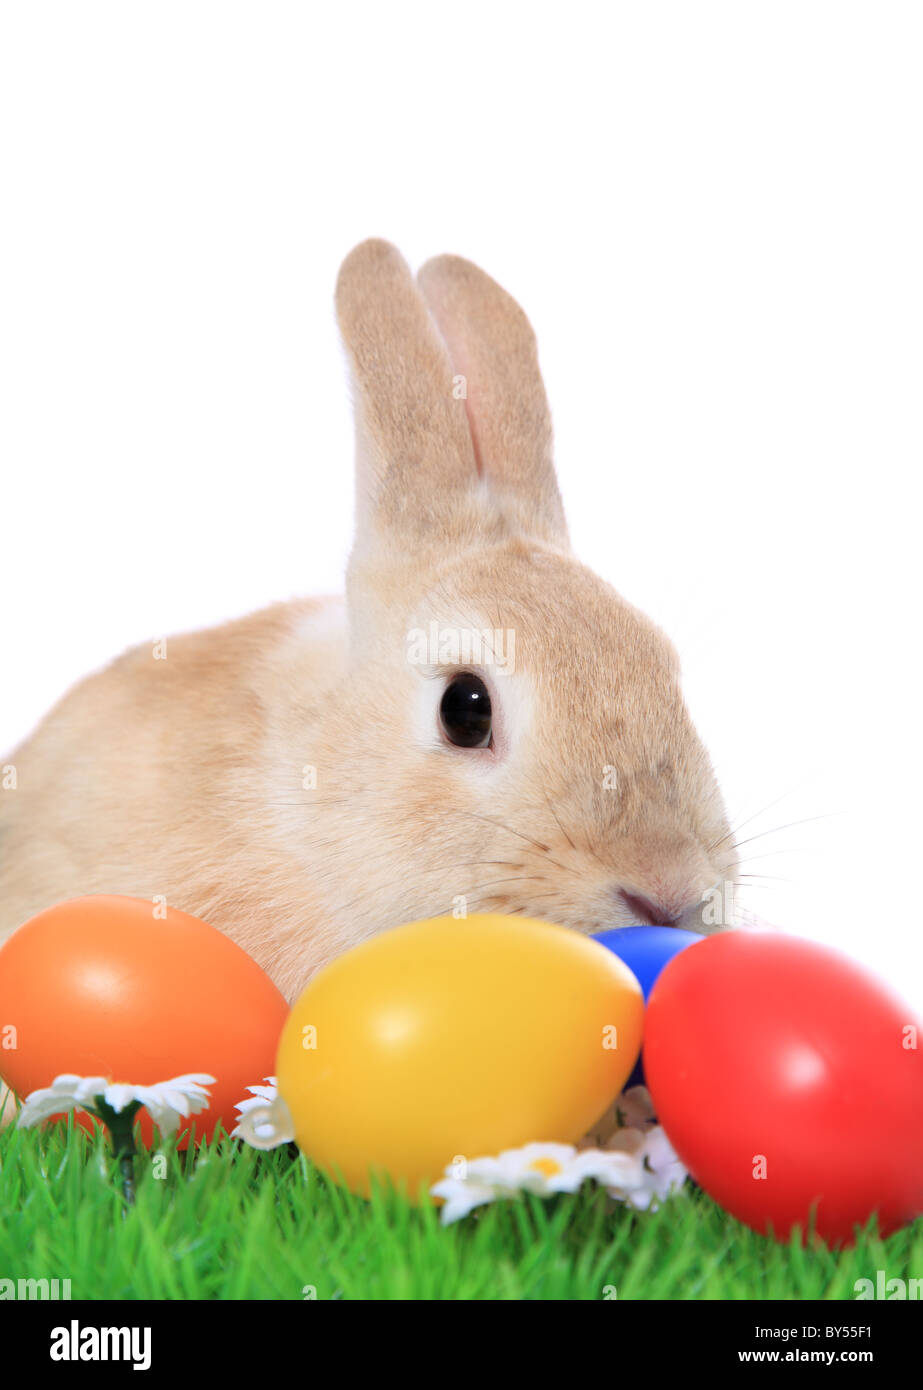 Cute little easter bunny on green meadow with colored eggs. All on white background. Stock Photo